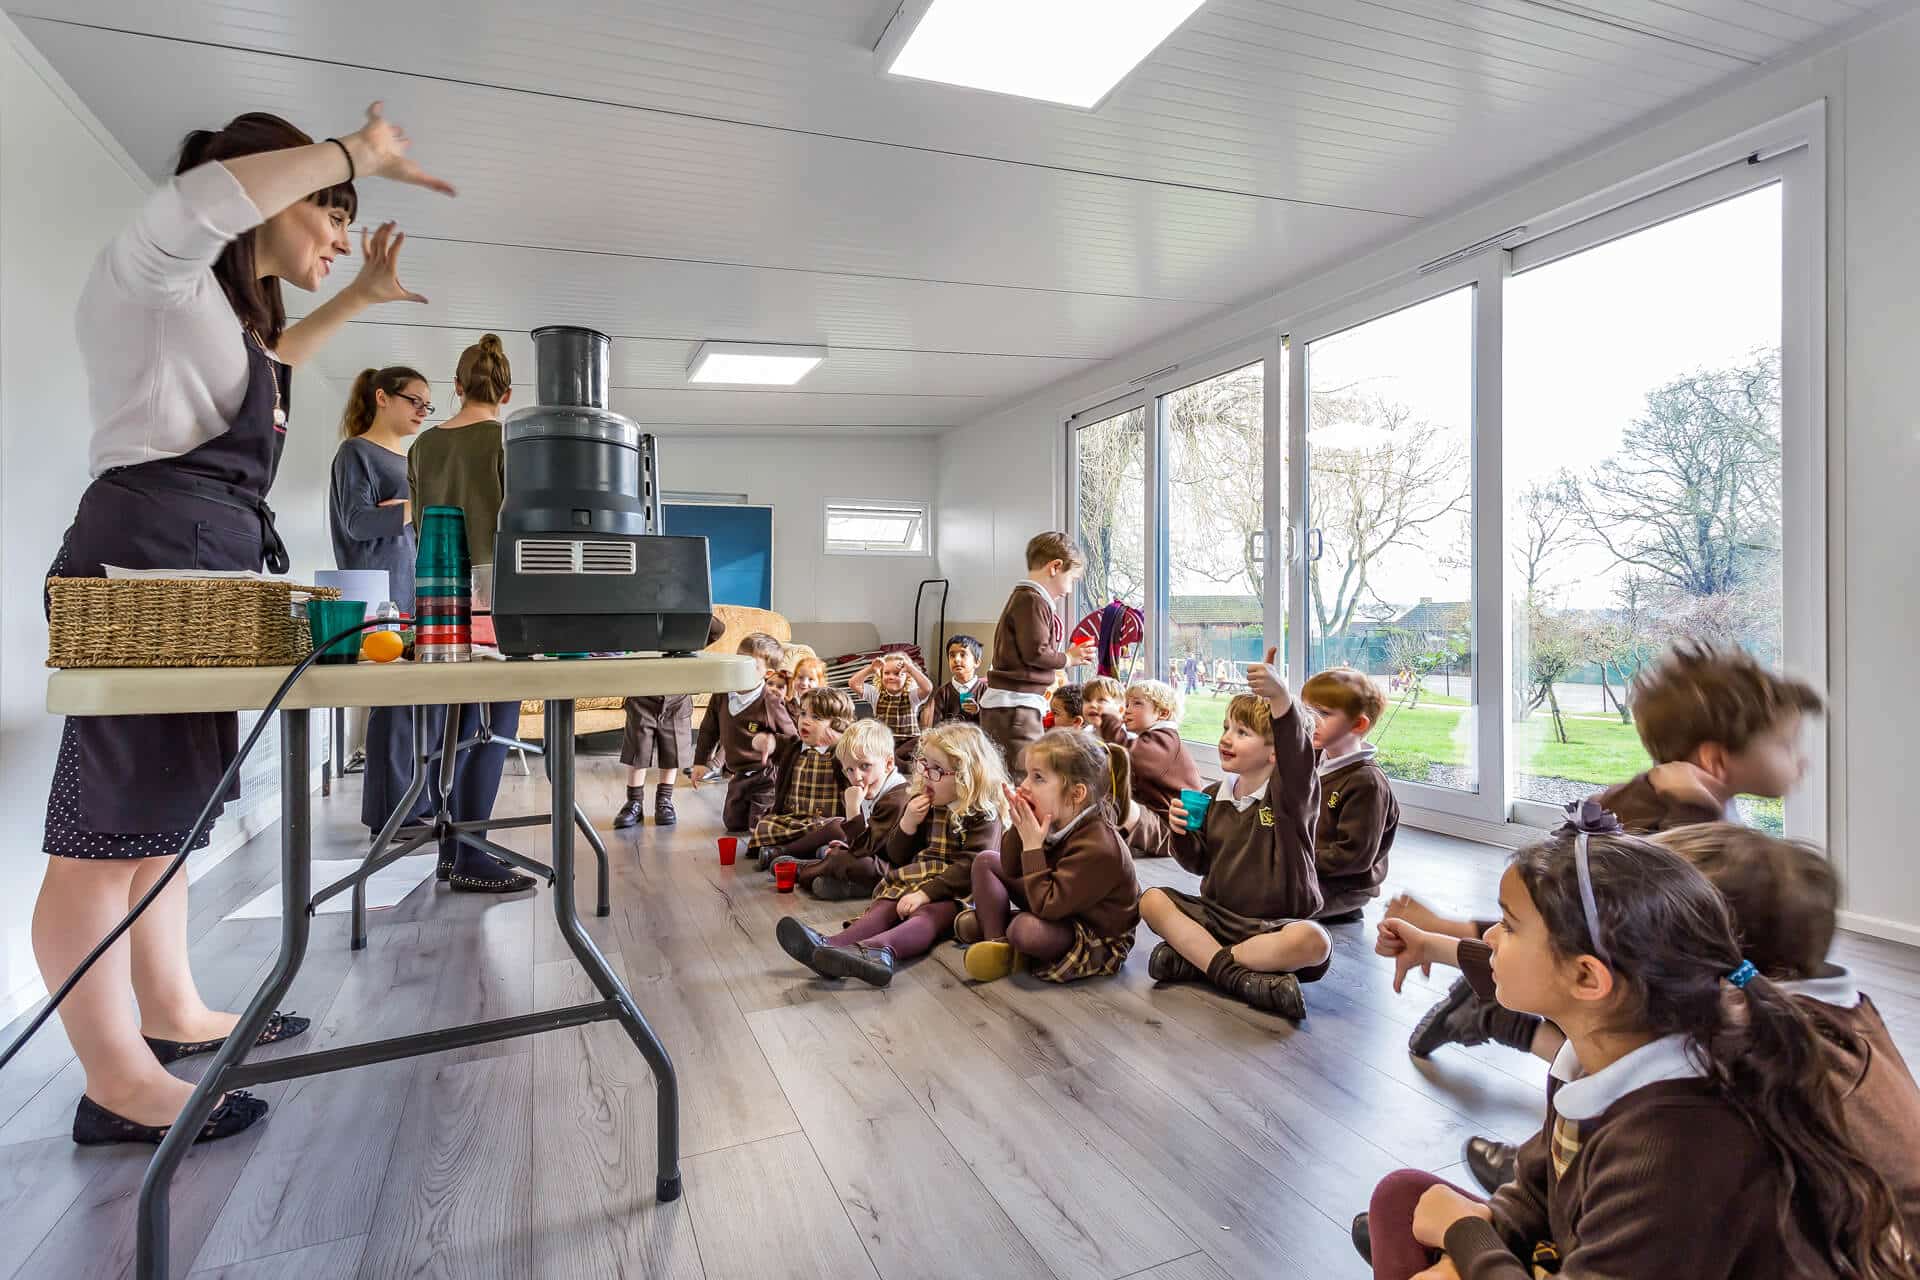 Interior side view of outdoor classroom building with light oak flooring. Female teacher stood at front engaging a group of primary school children in brown uniform.